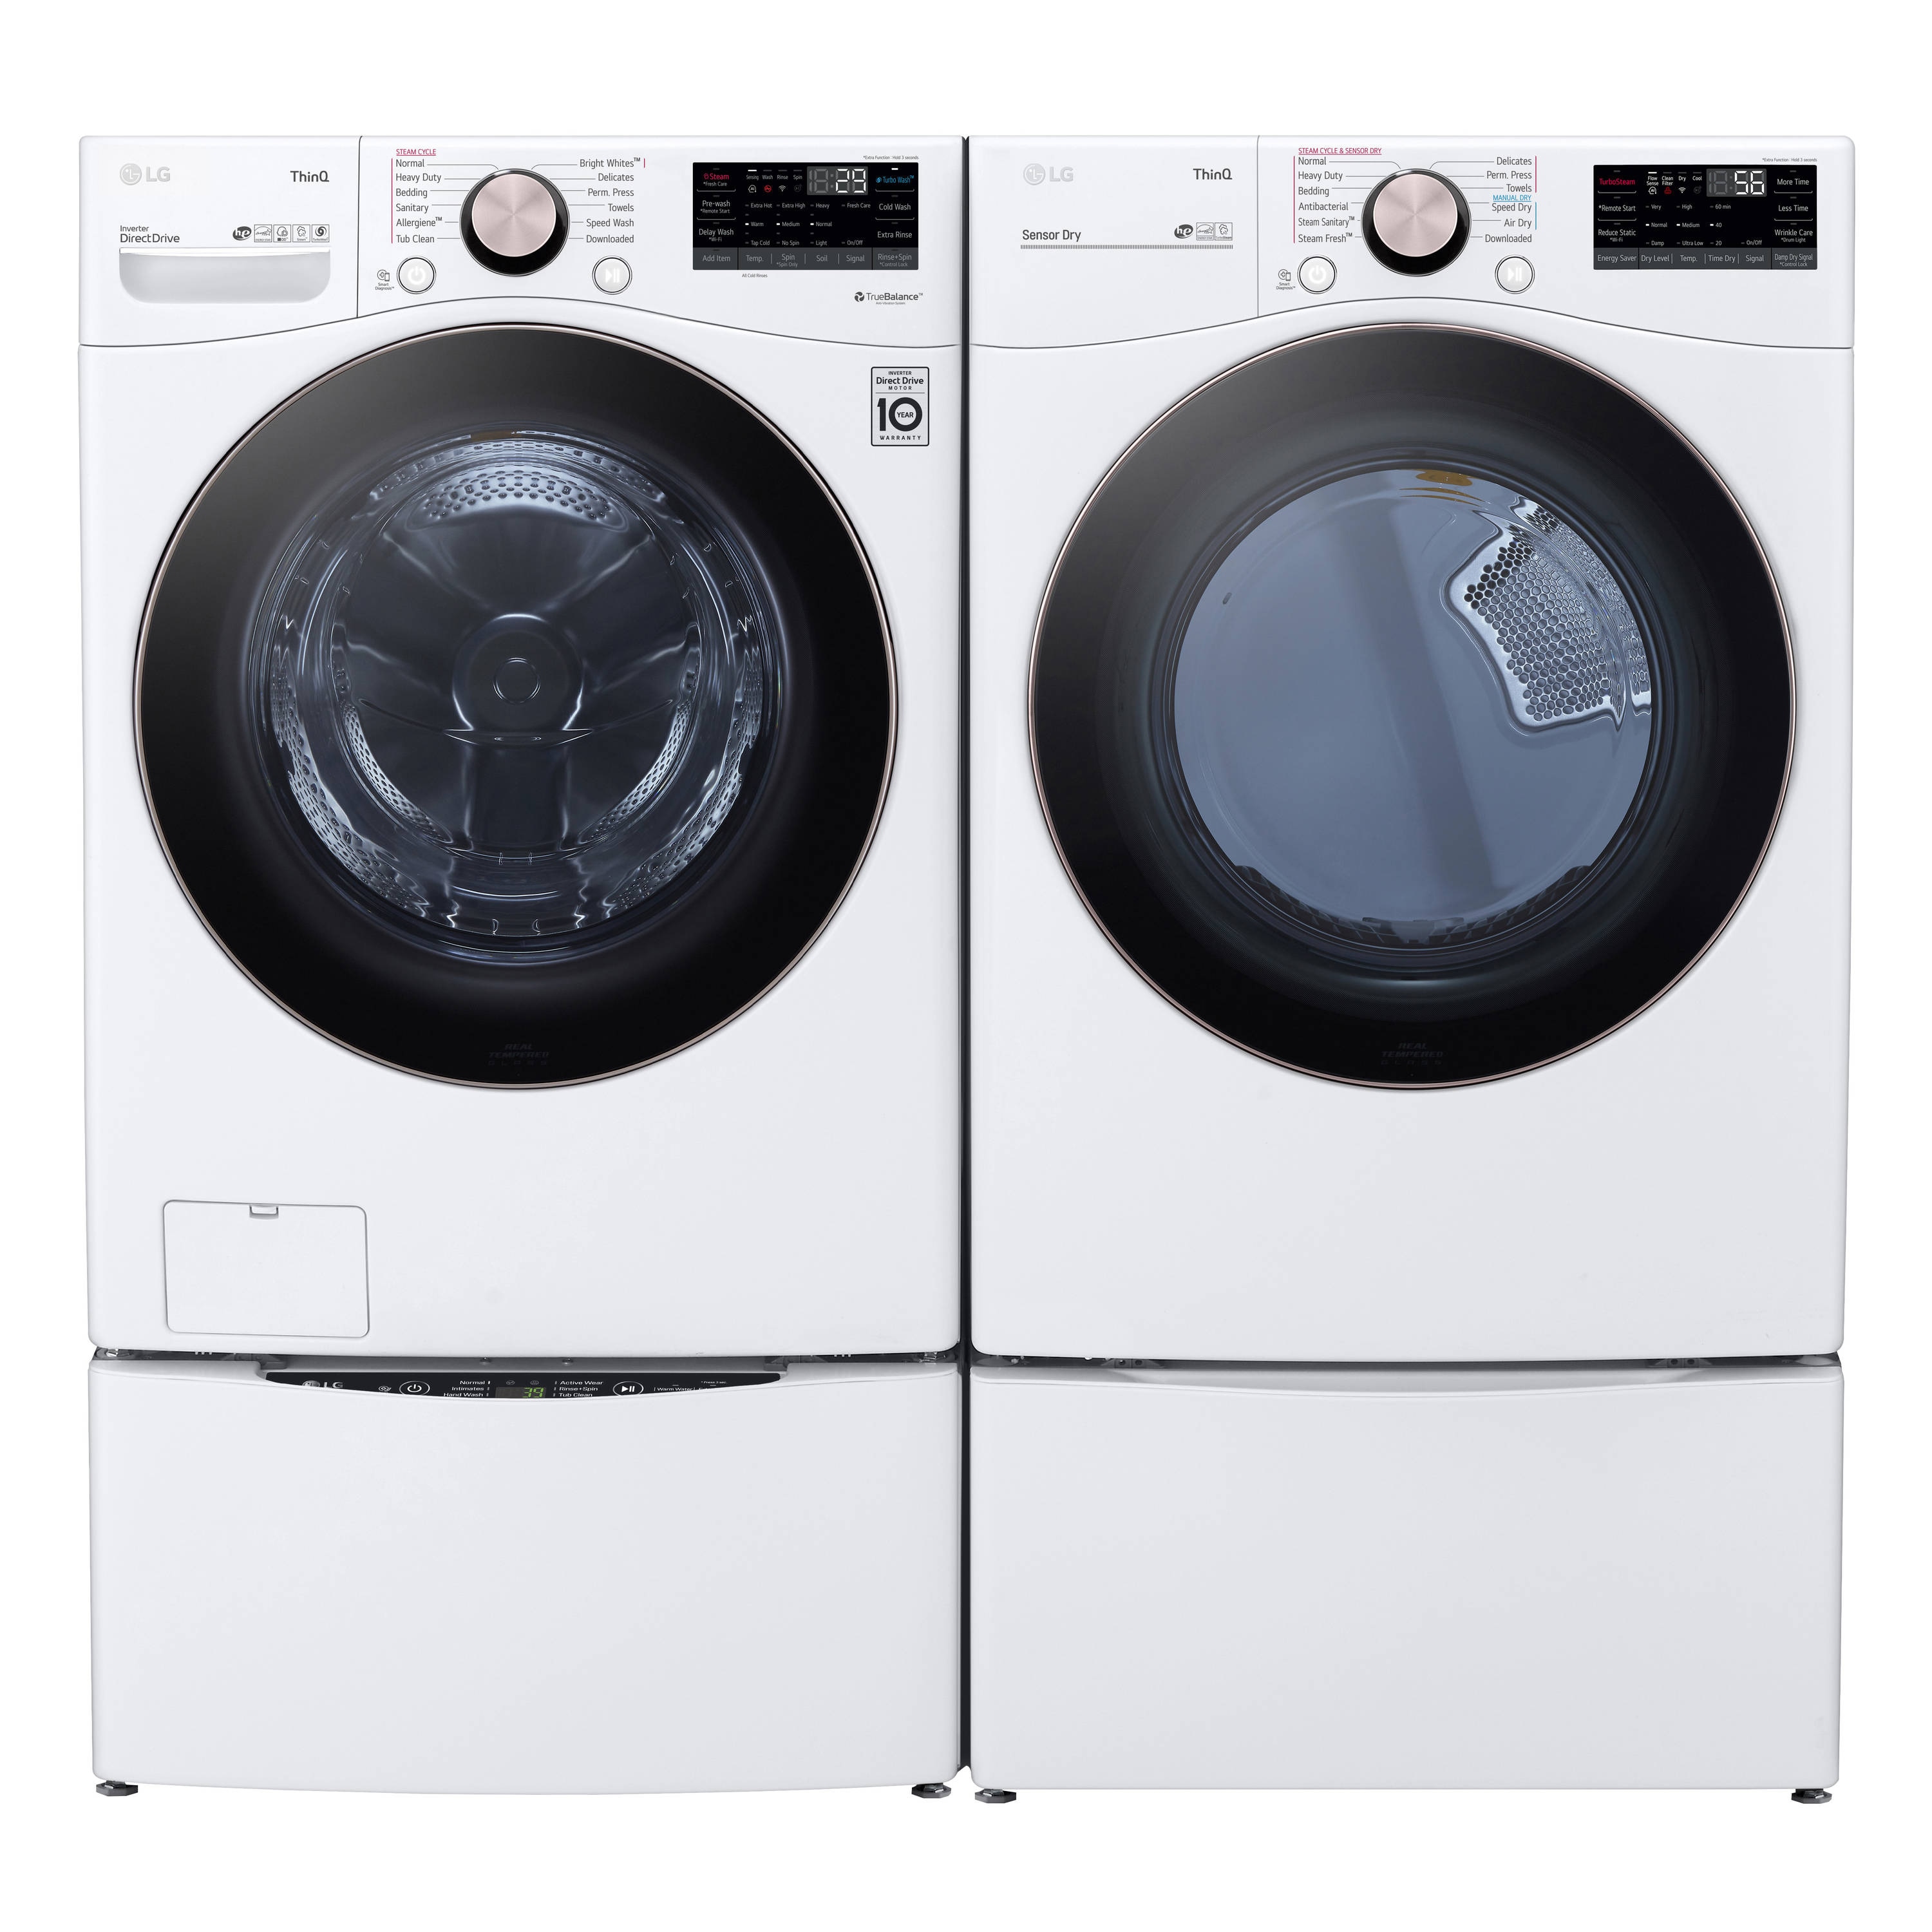 LG, Whirlpool Target Customers Disconnected From 'Smart